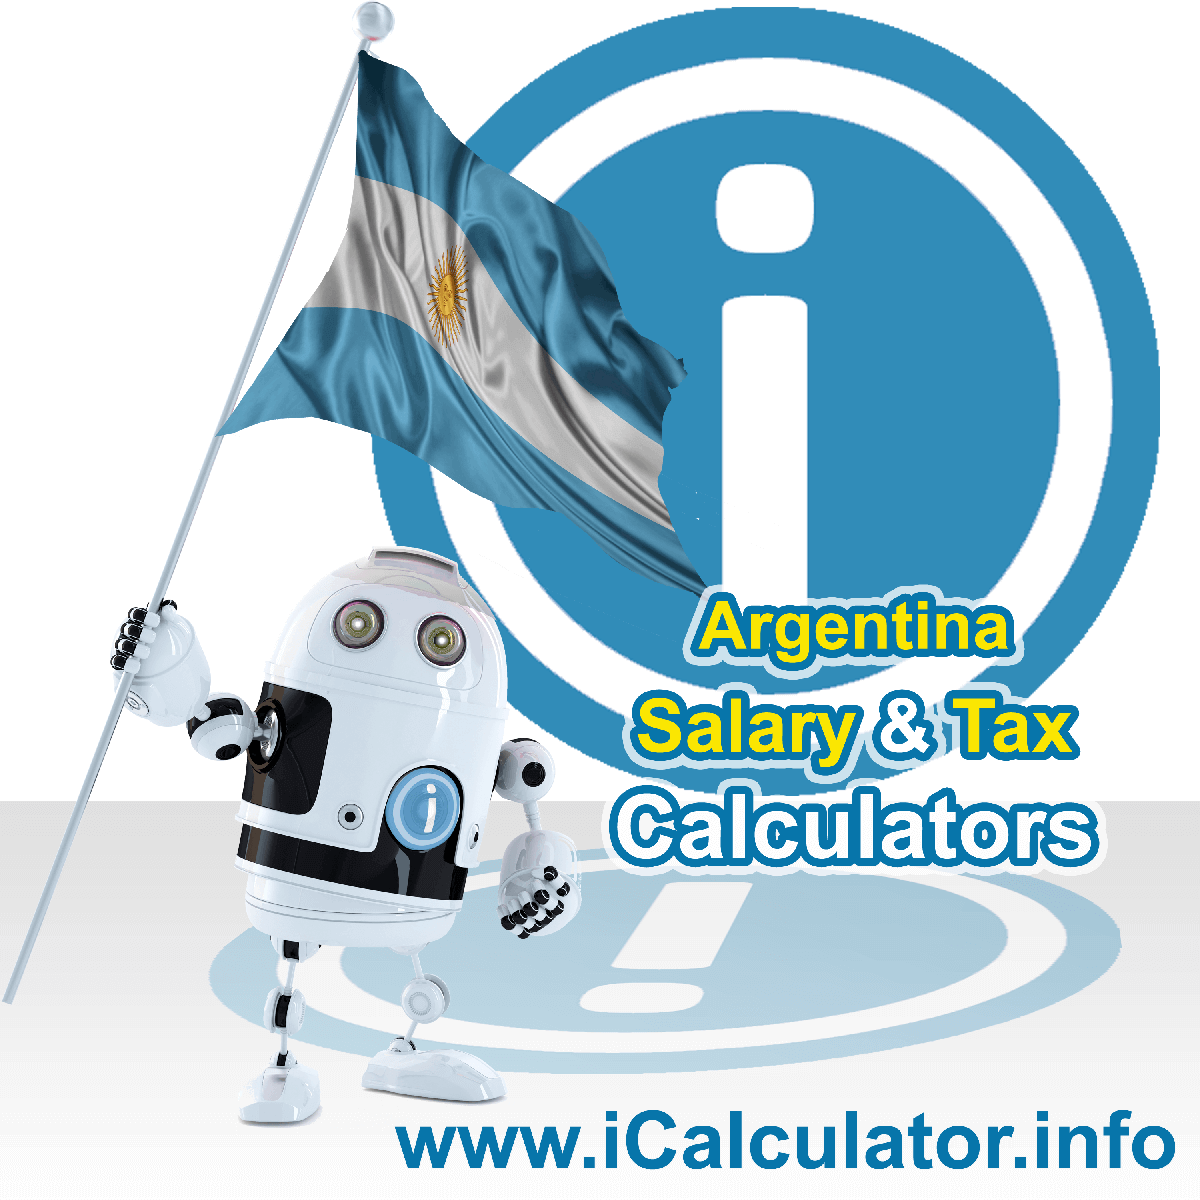 Argentina Salary Calculator. This image shows the Argentinaese flag and information relating to the tax formula for the Argentina Tax Calculator